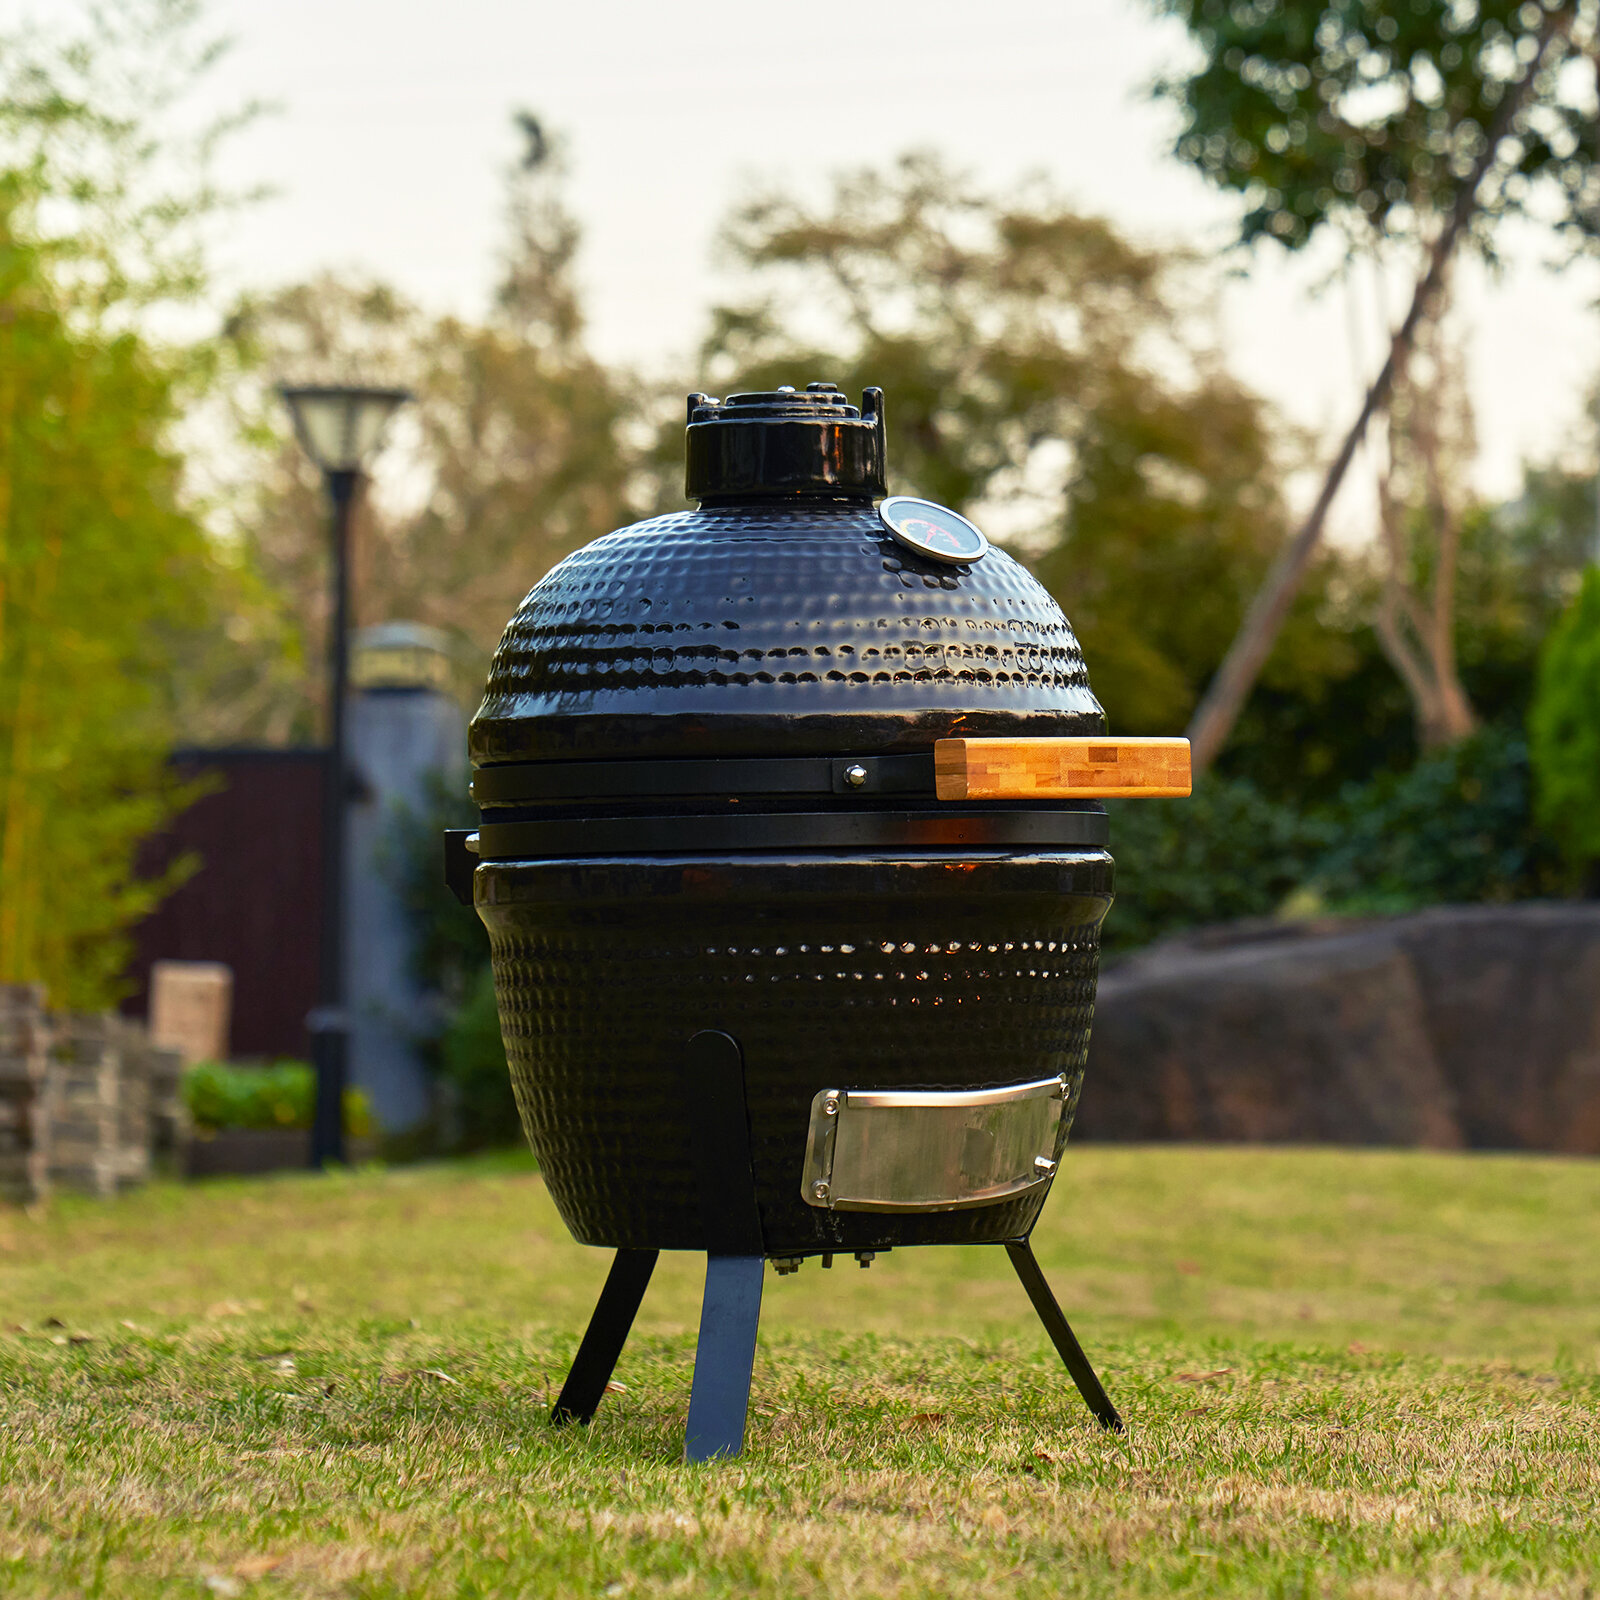 in front of Archeological dispersion Sonegra 13" Egg Kamado Charcoal Grill | Wayfair